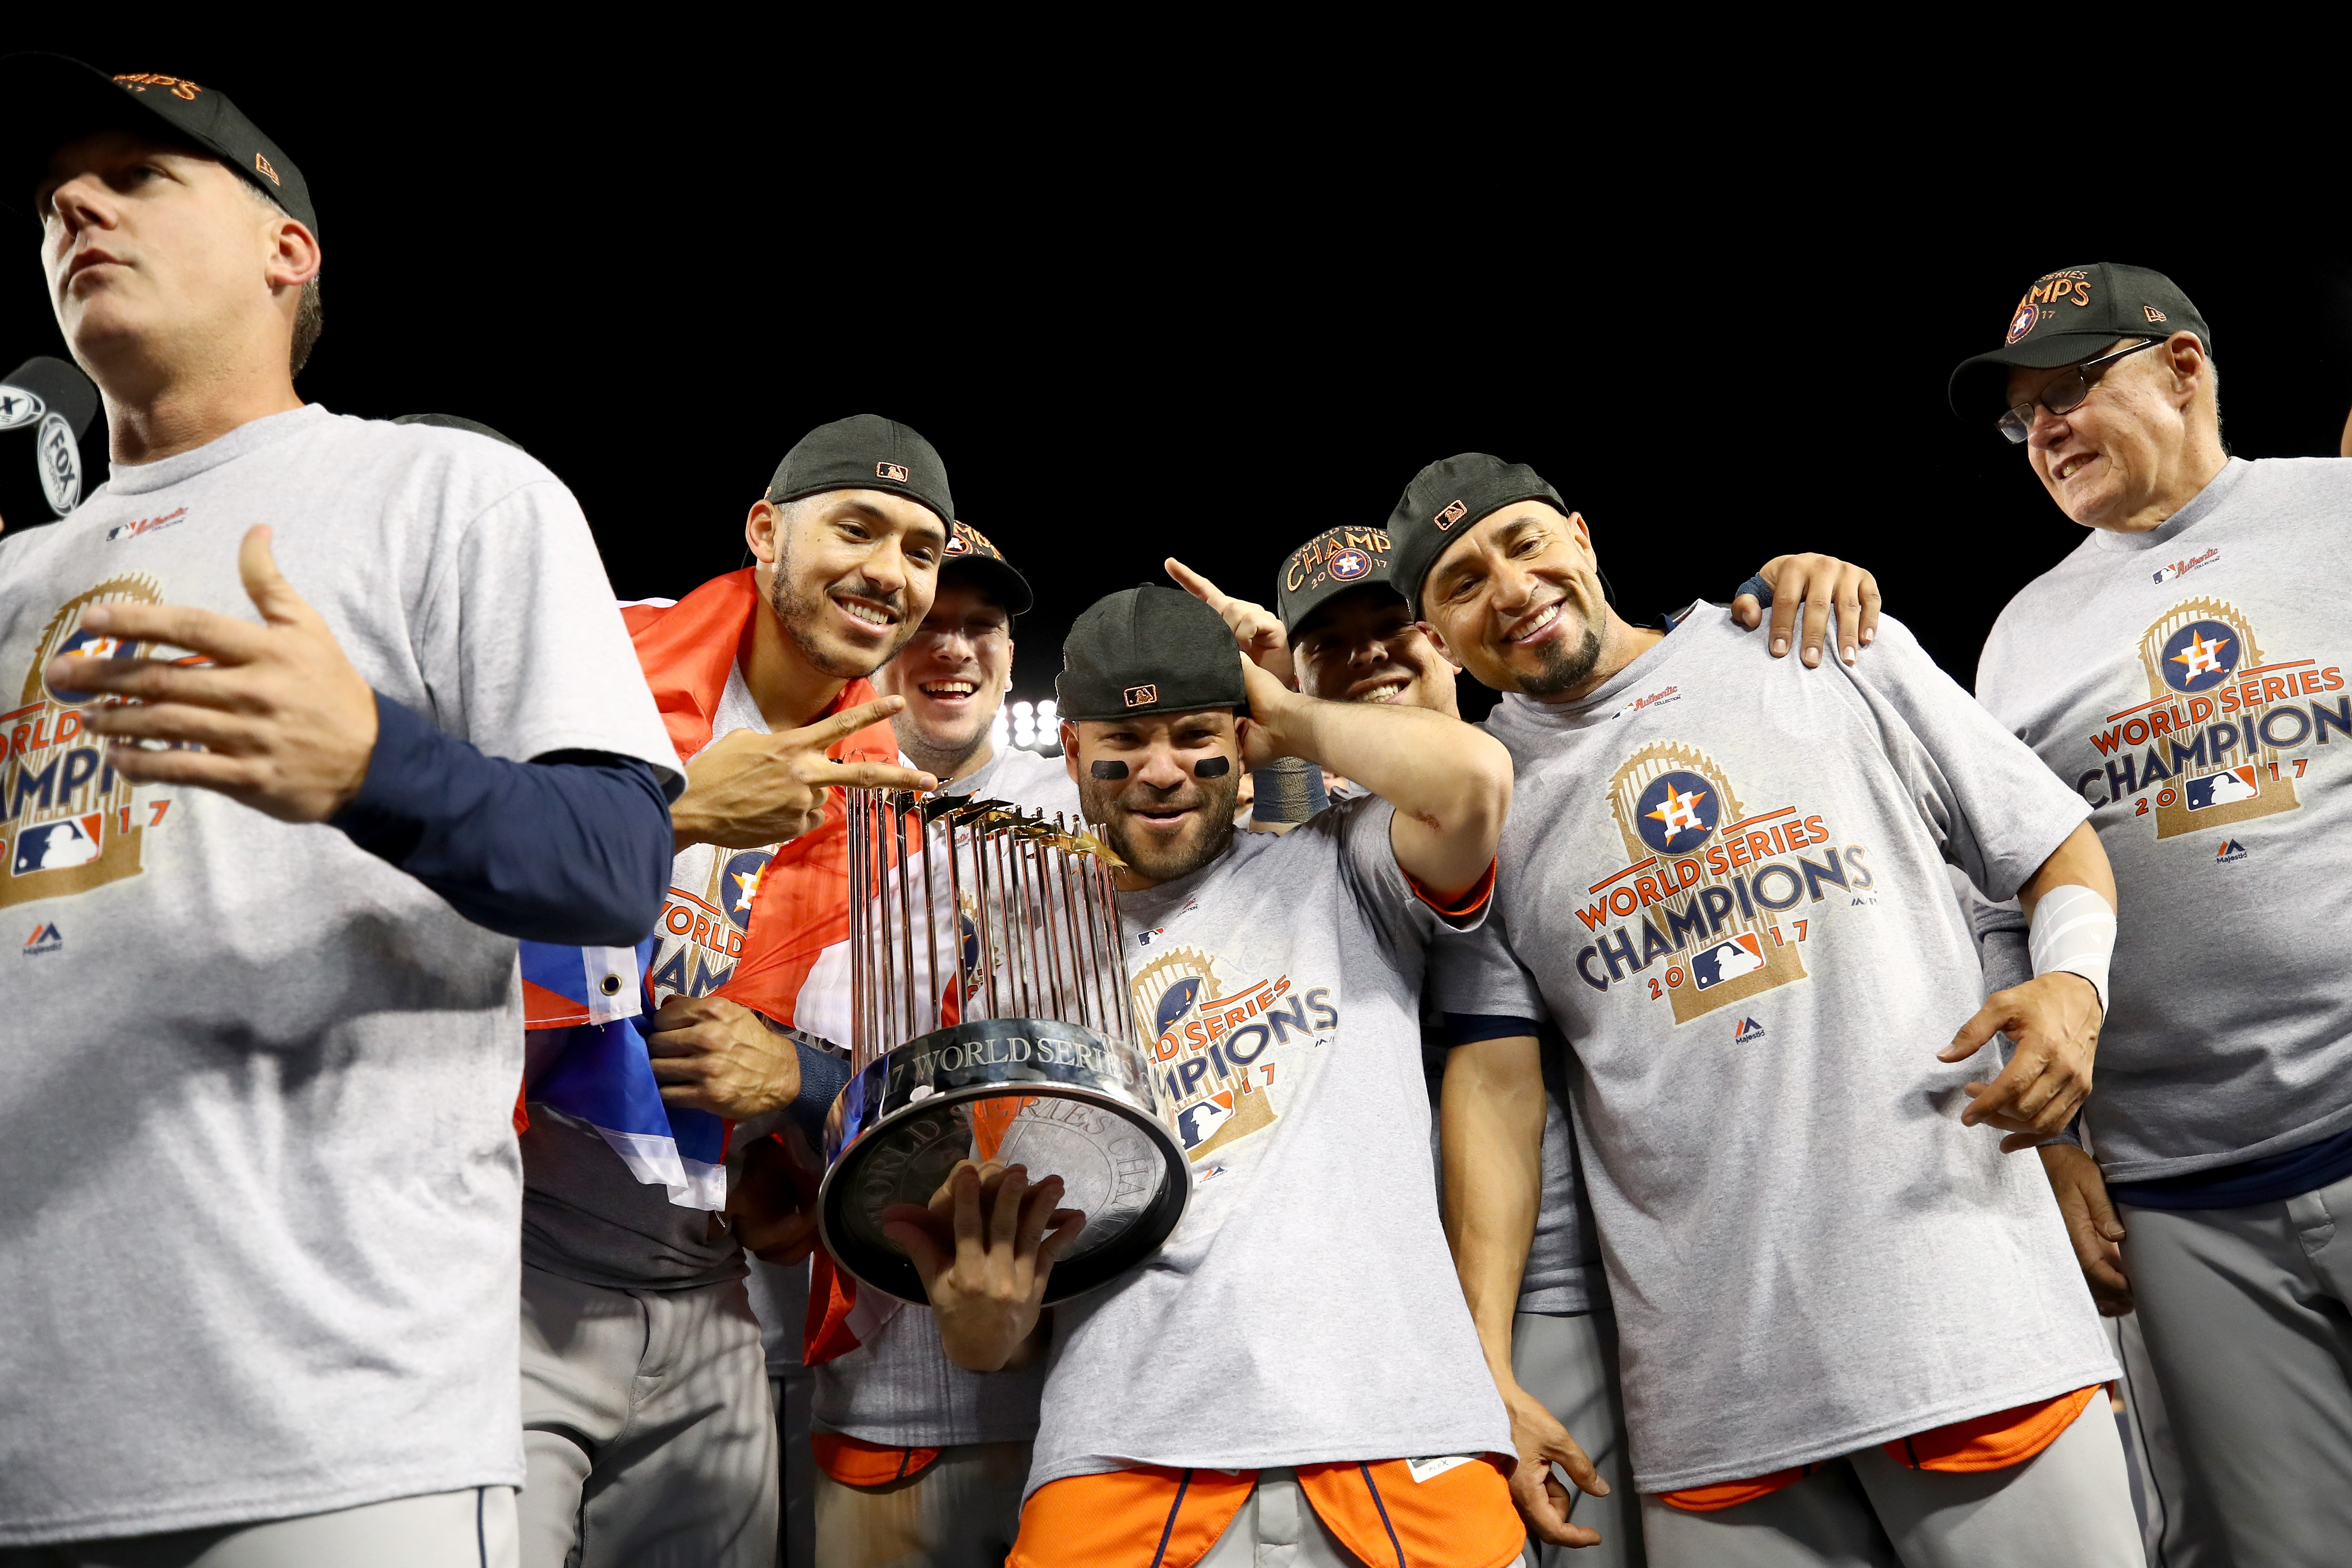 How Many World Series Have the Astros Won? Houston Astros World Series Record and History